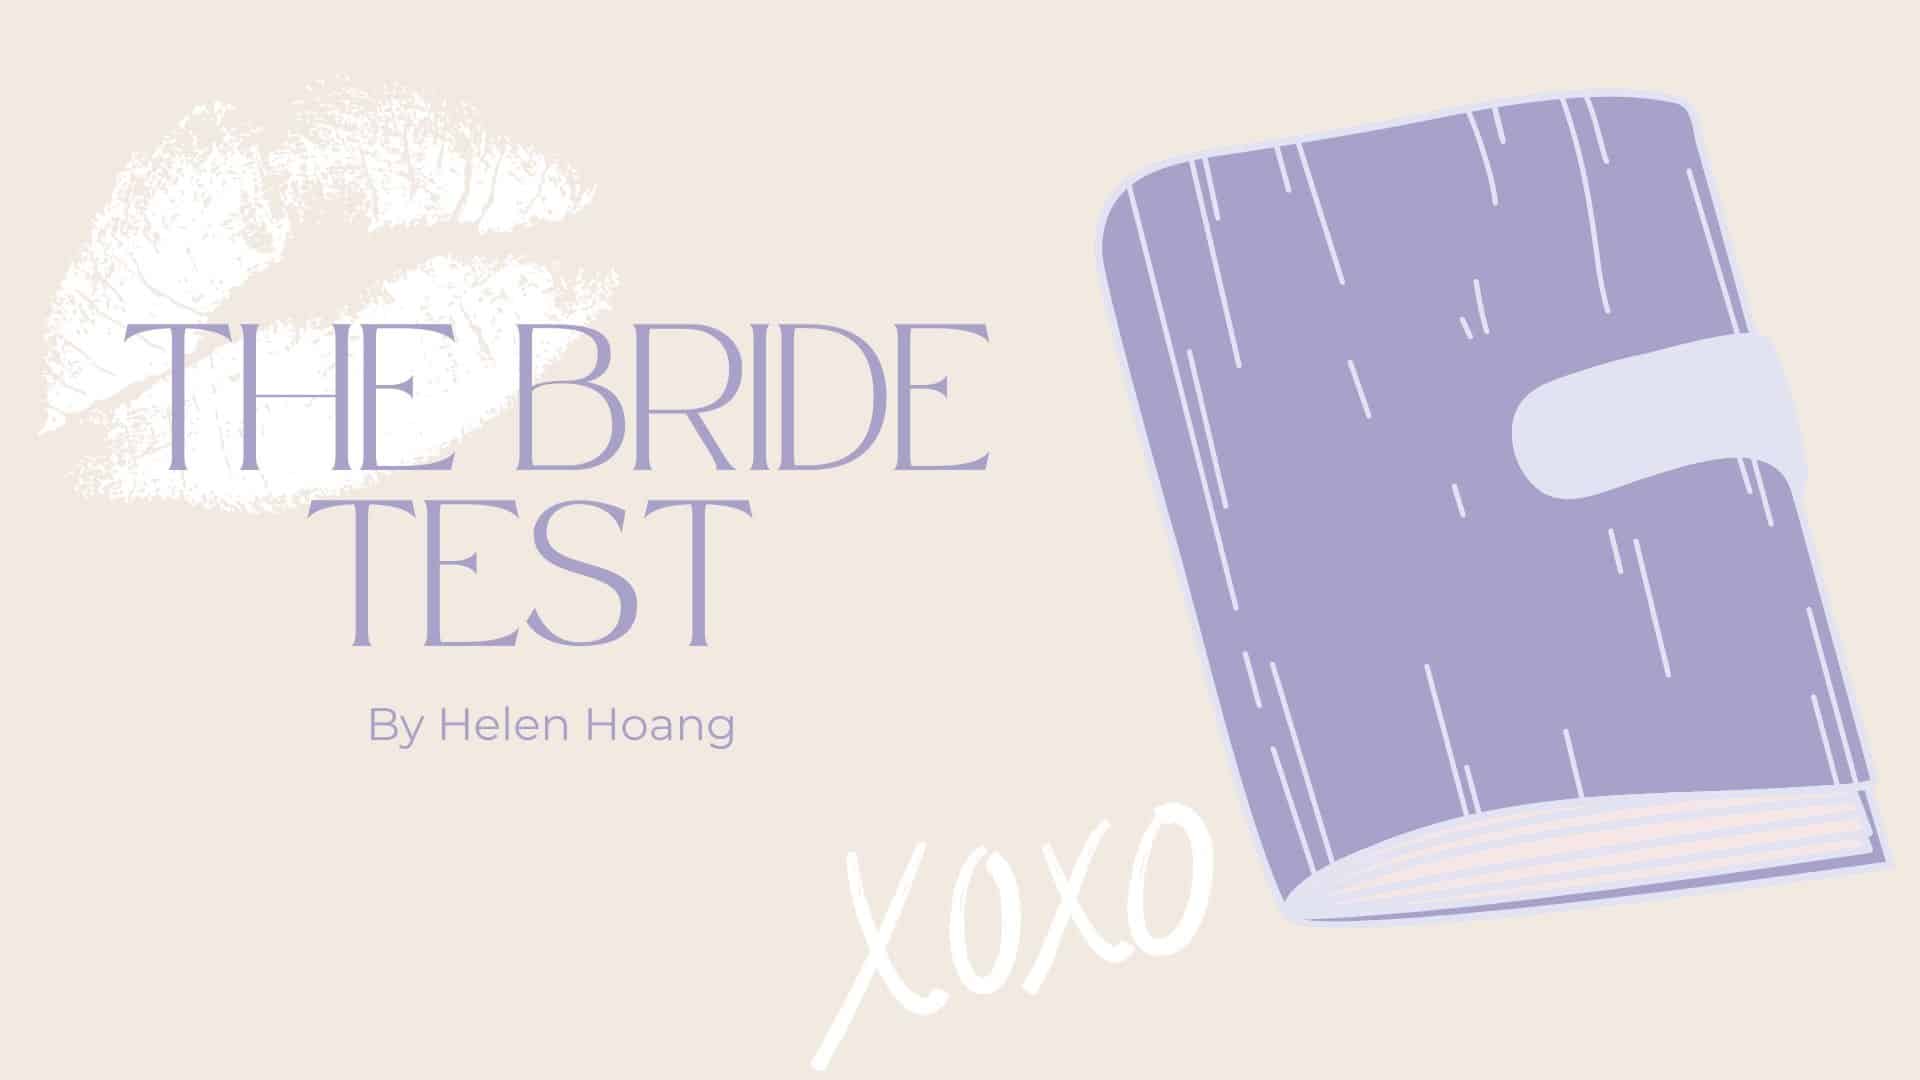 The bride test by helen hoang